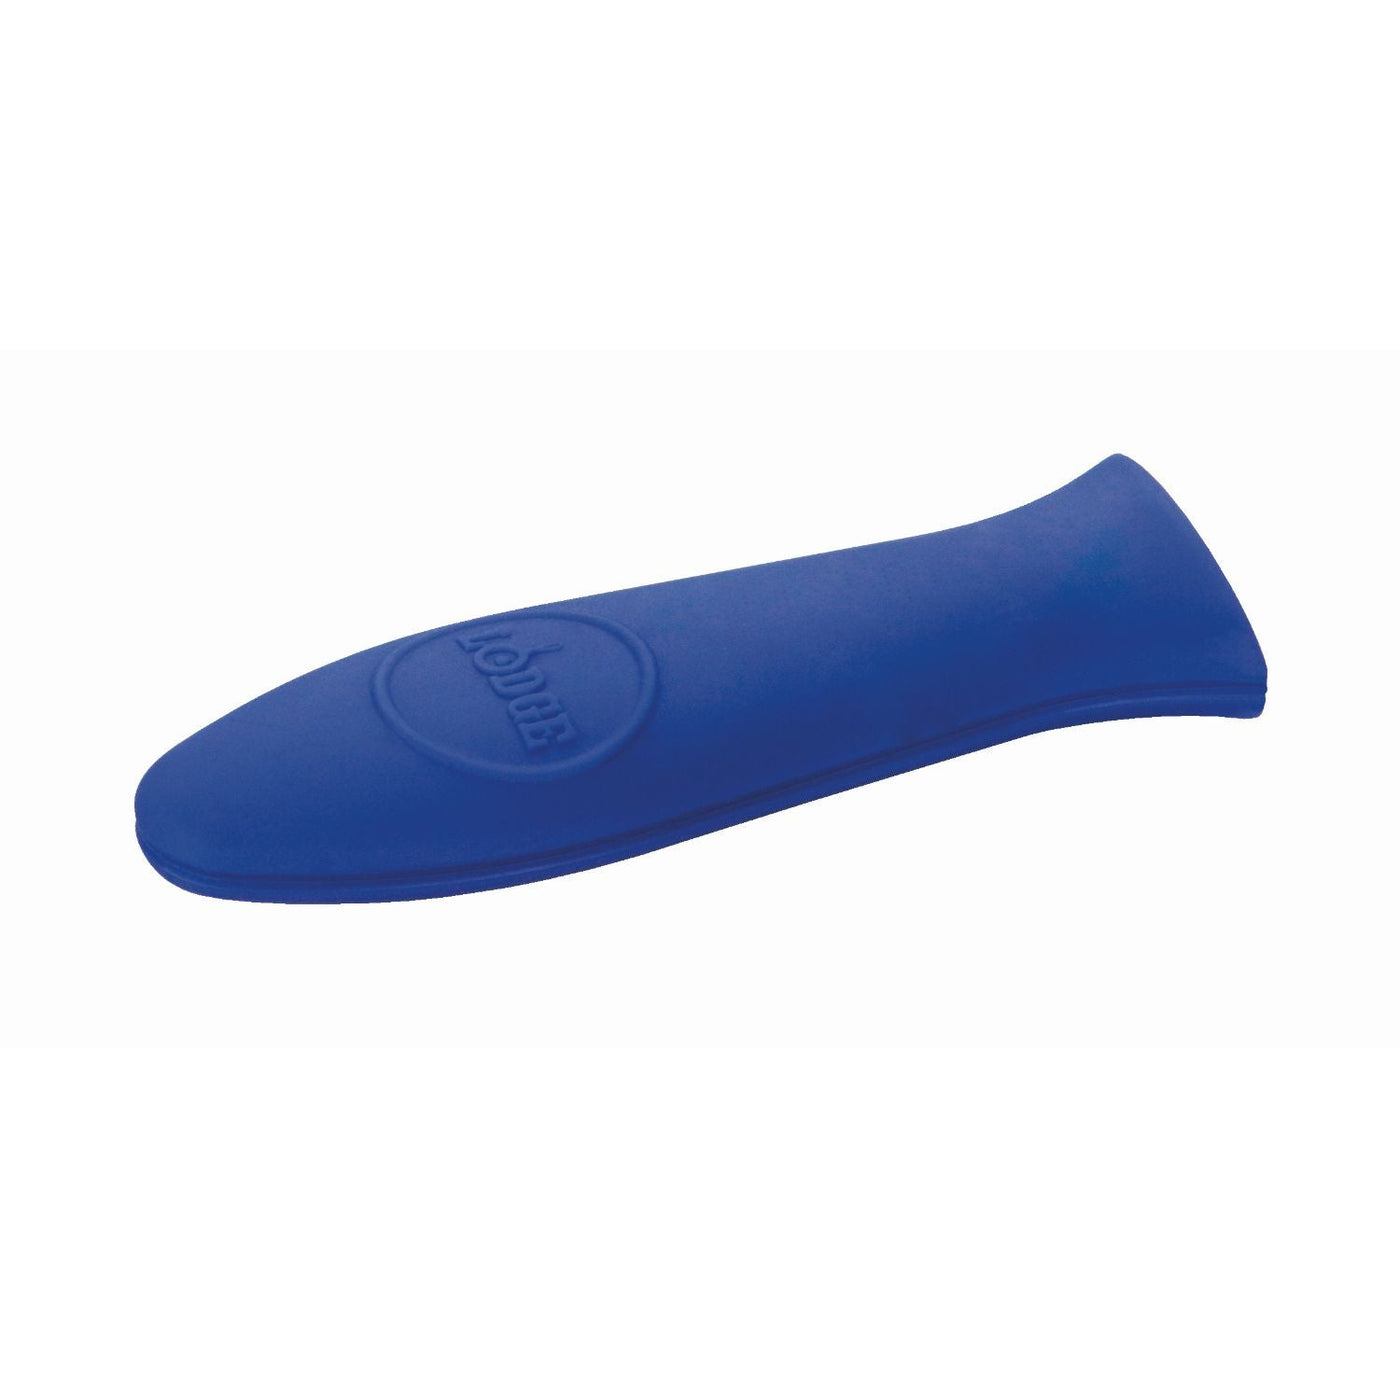 Lodge Cast Iron Lodge ASHH31 Blue Silicone Hot Handle Holder Camping And Outdoor